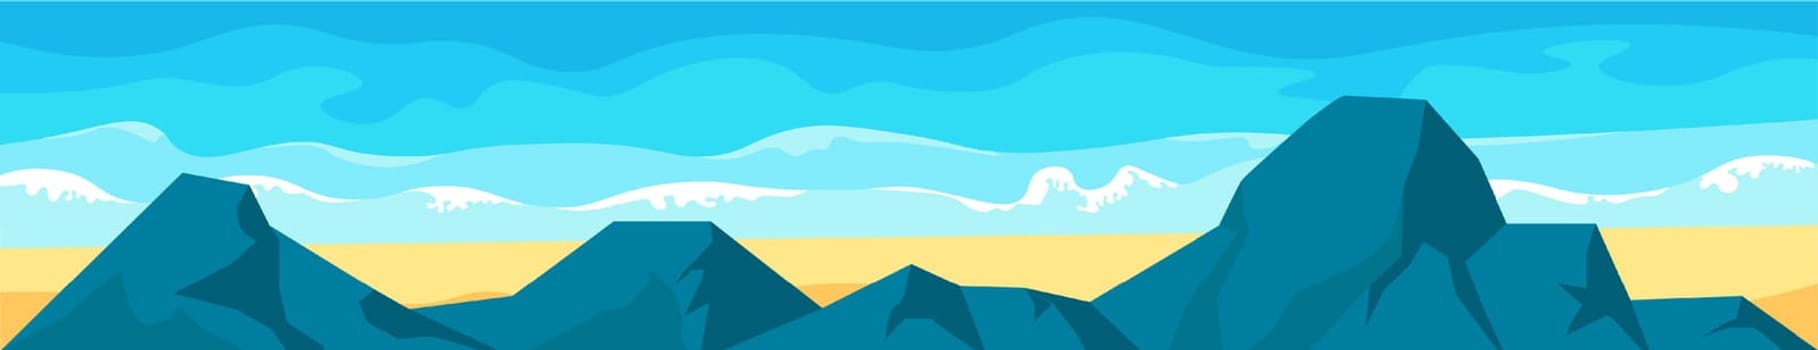 High mountains range with peaks and beach vector